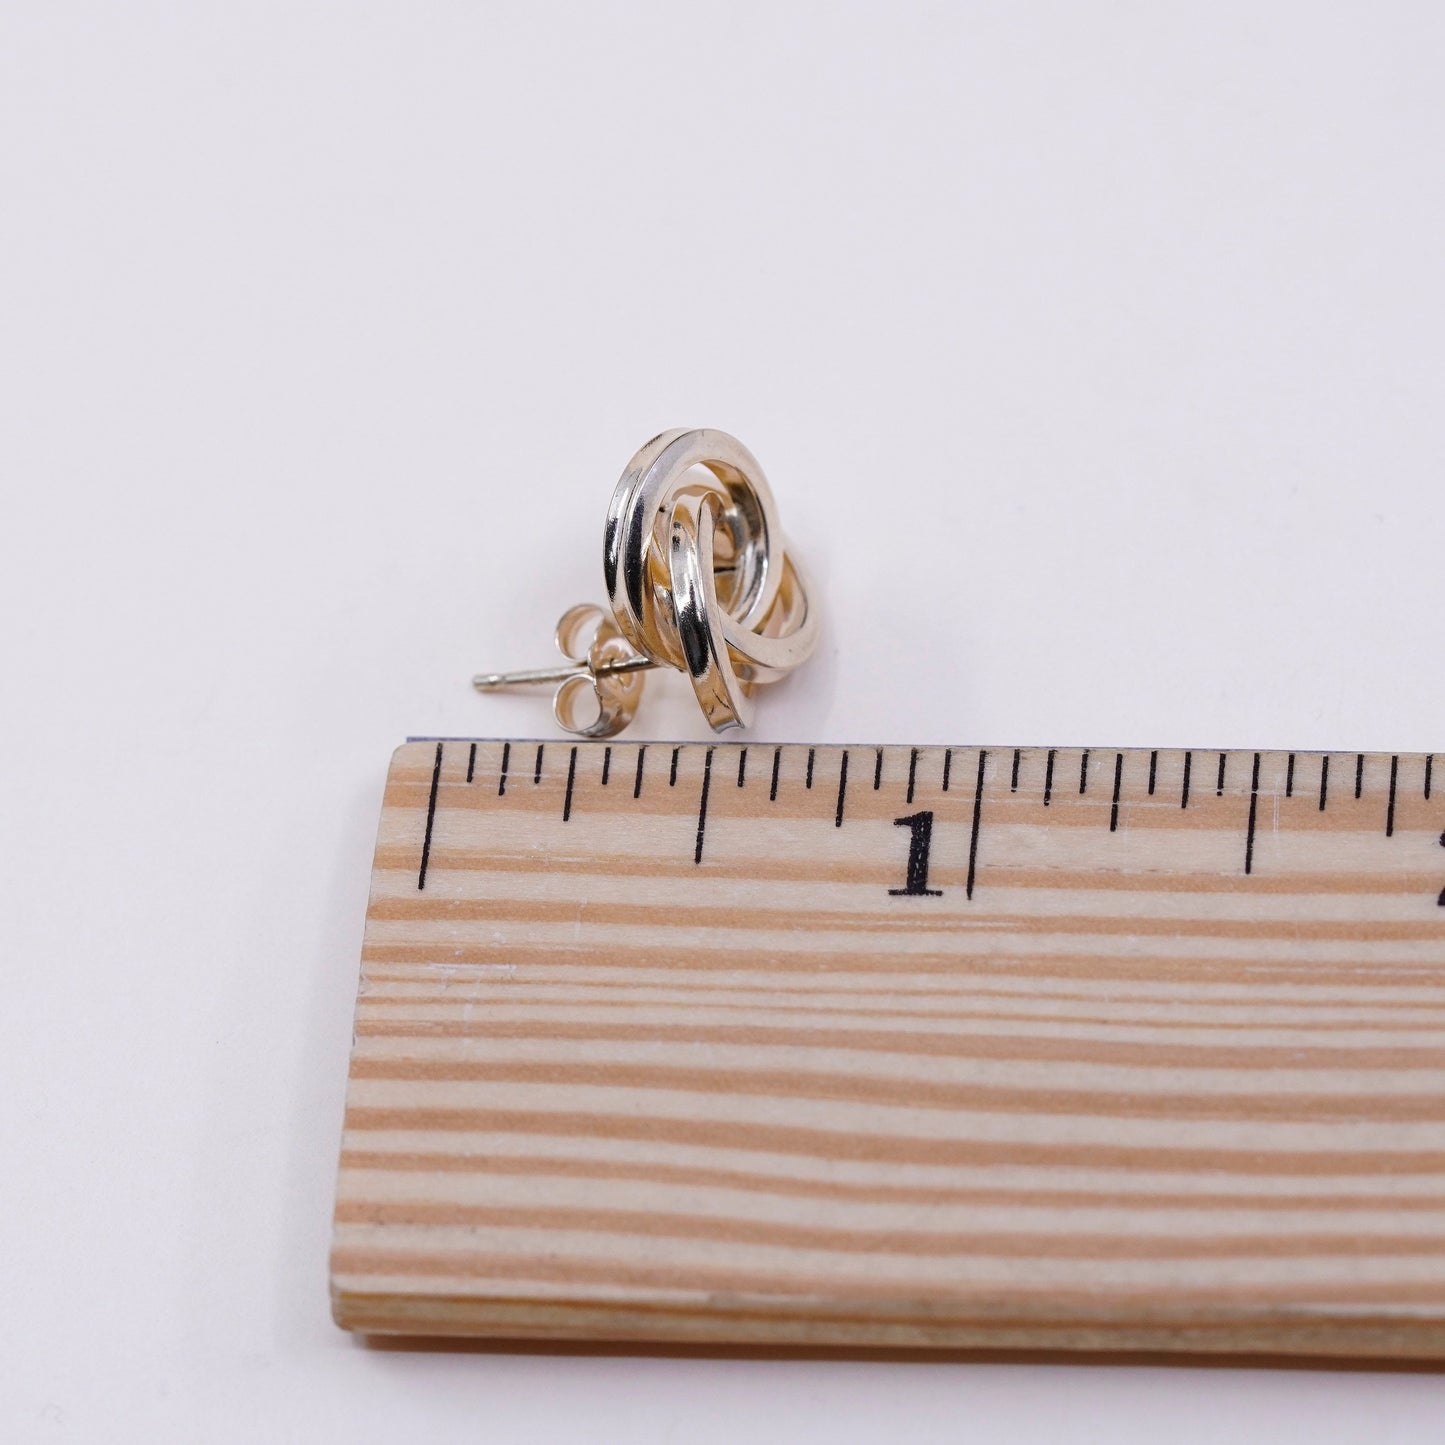 2.8g, vintage 14K yellow gold earrings, real gold edgy entwined circle studs , stamped 14K